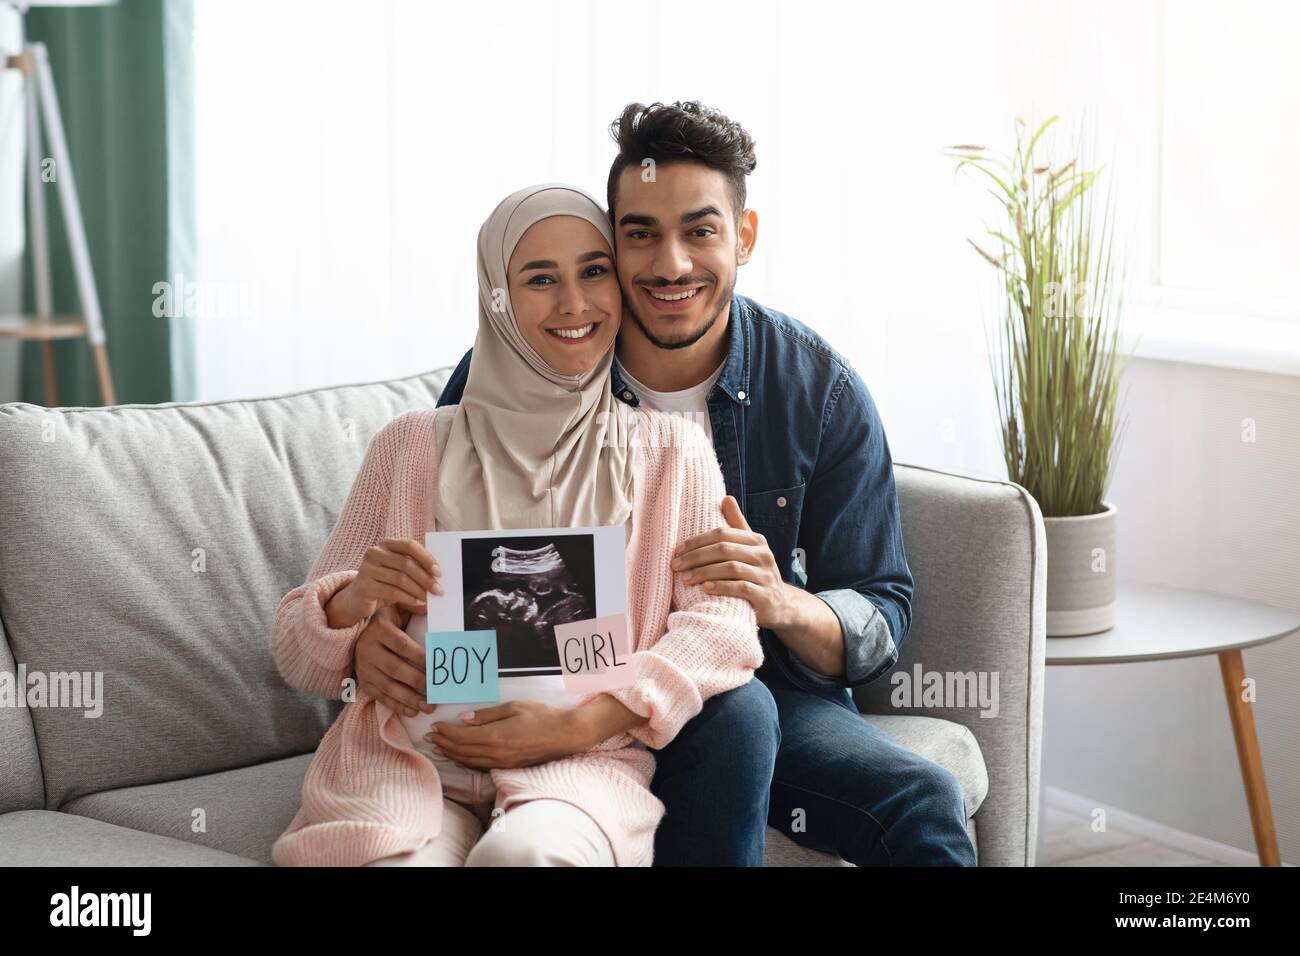 Gender Reveal. Happy pregnant muslim couple holding baby ultrasound photo at home Stock Photo